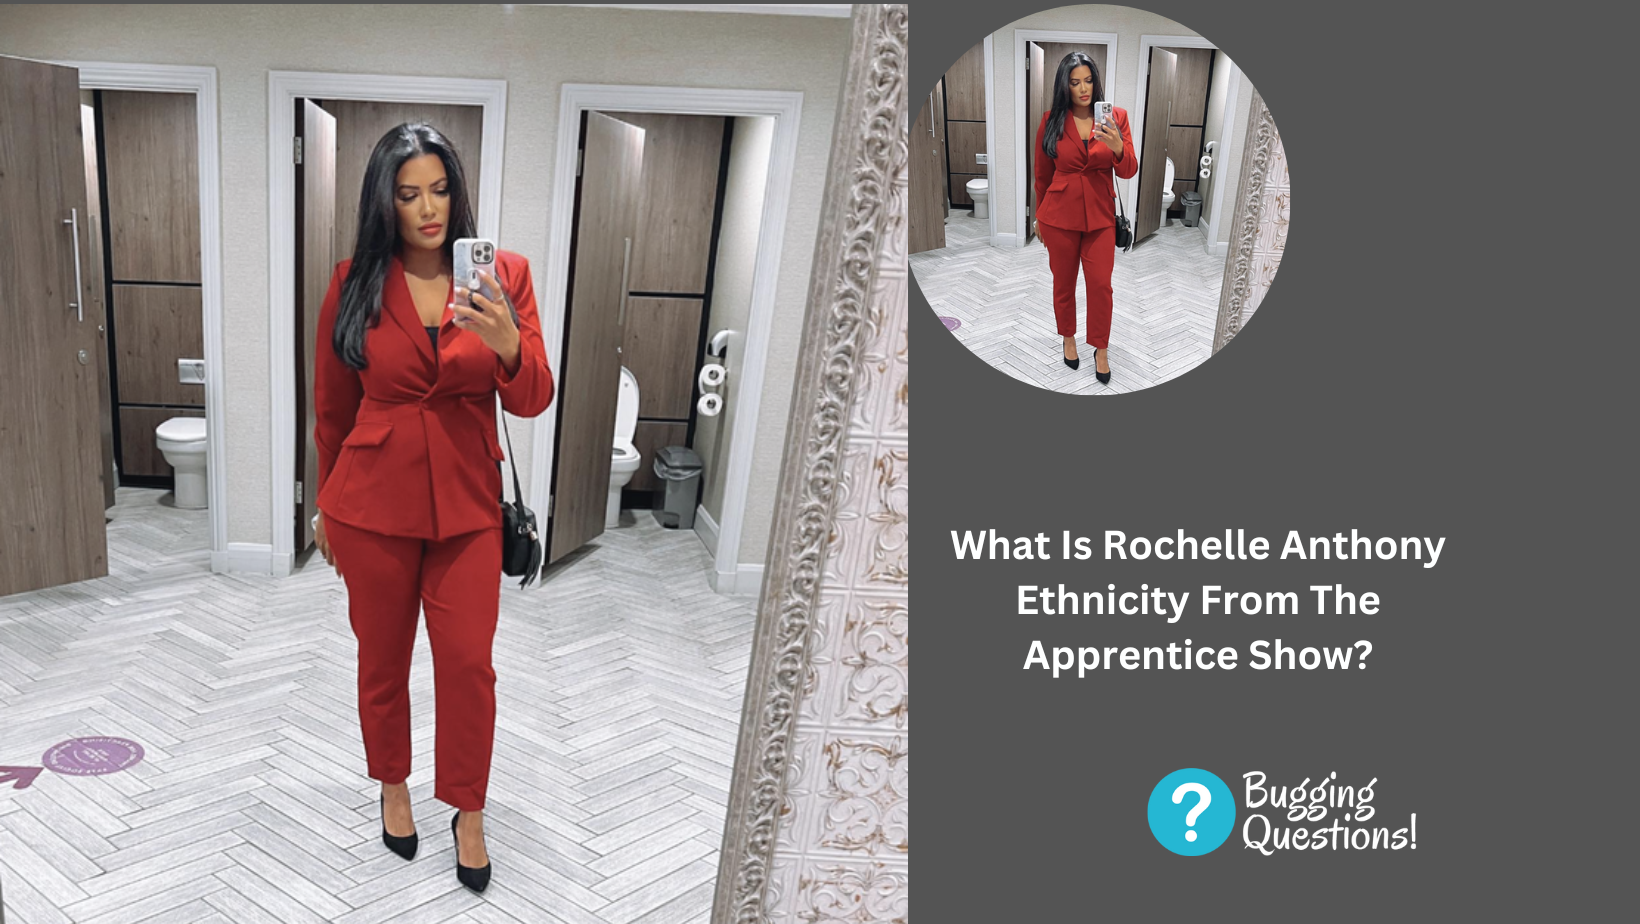 What Is Rochelle Anthony Ethnicity From The Apprentice Show?